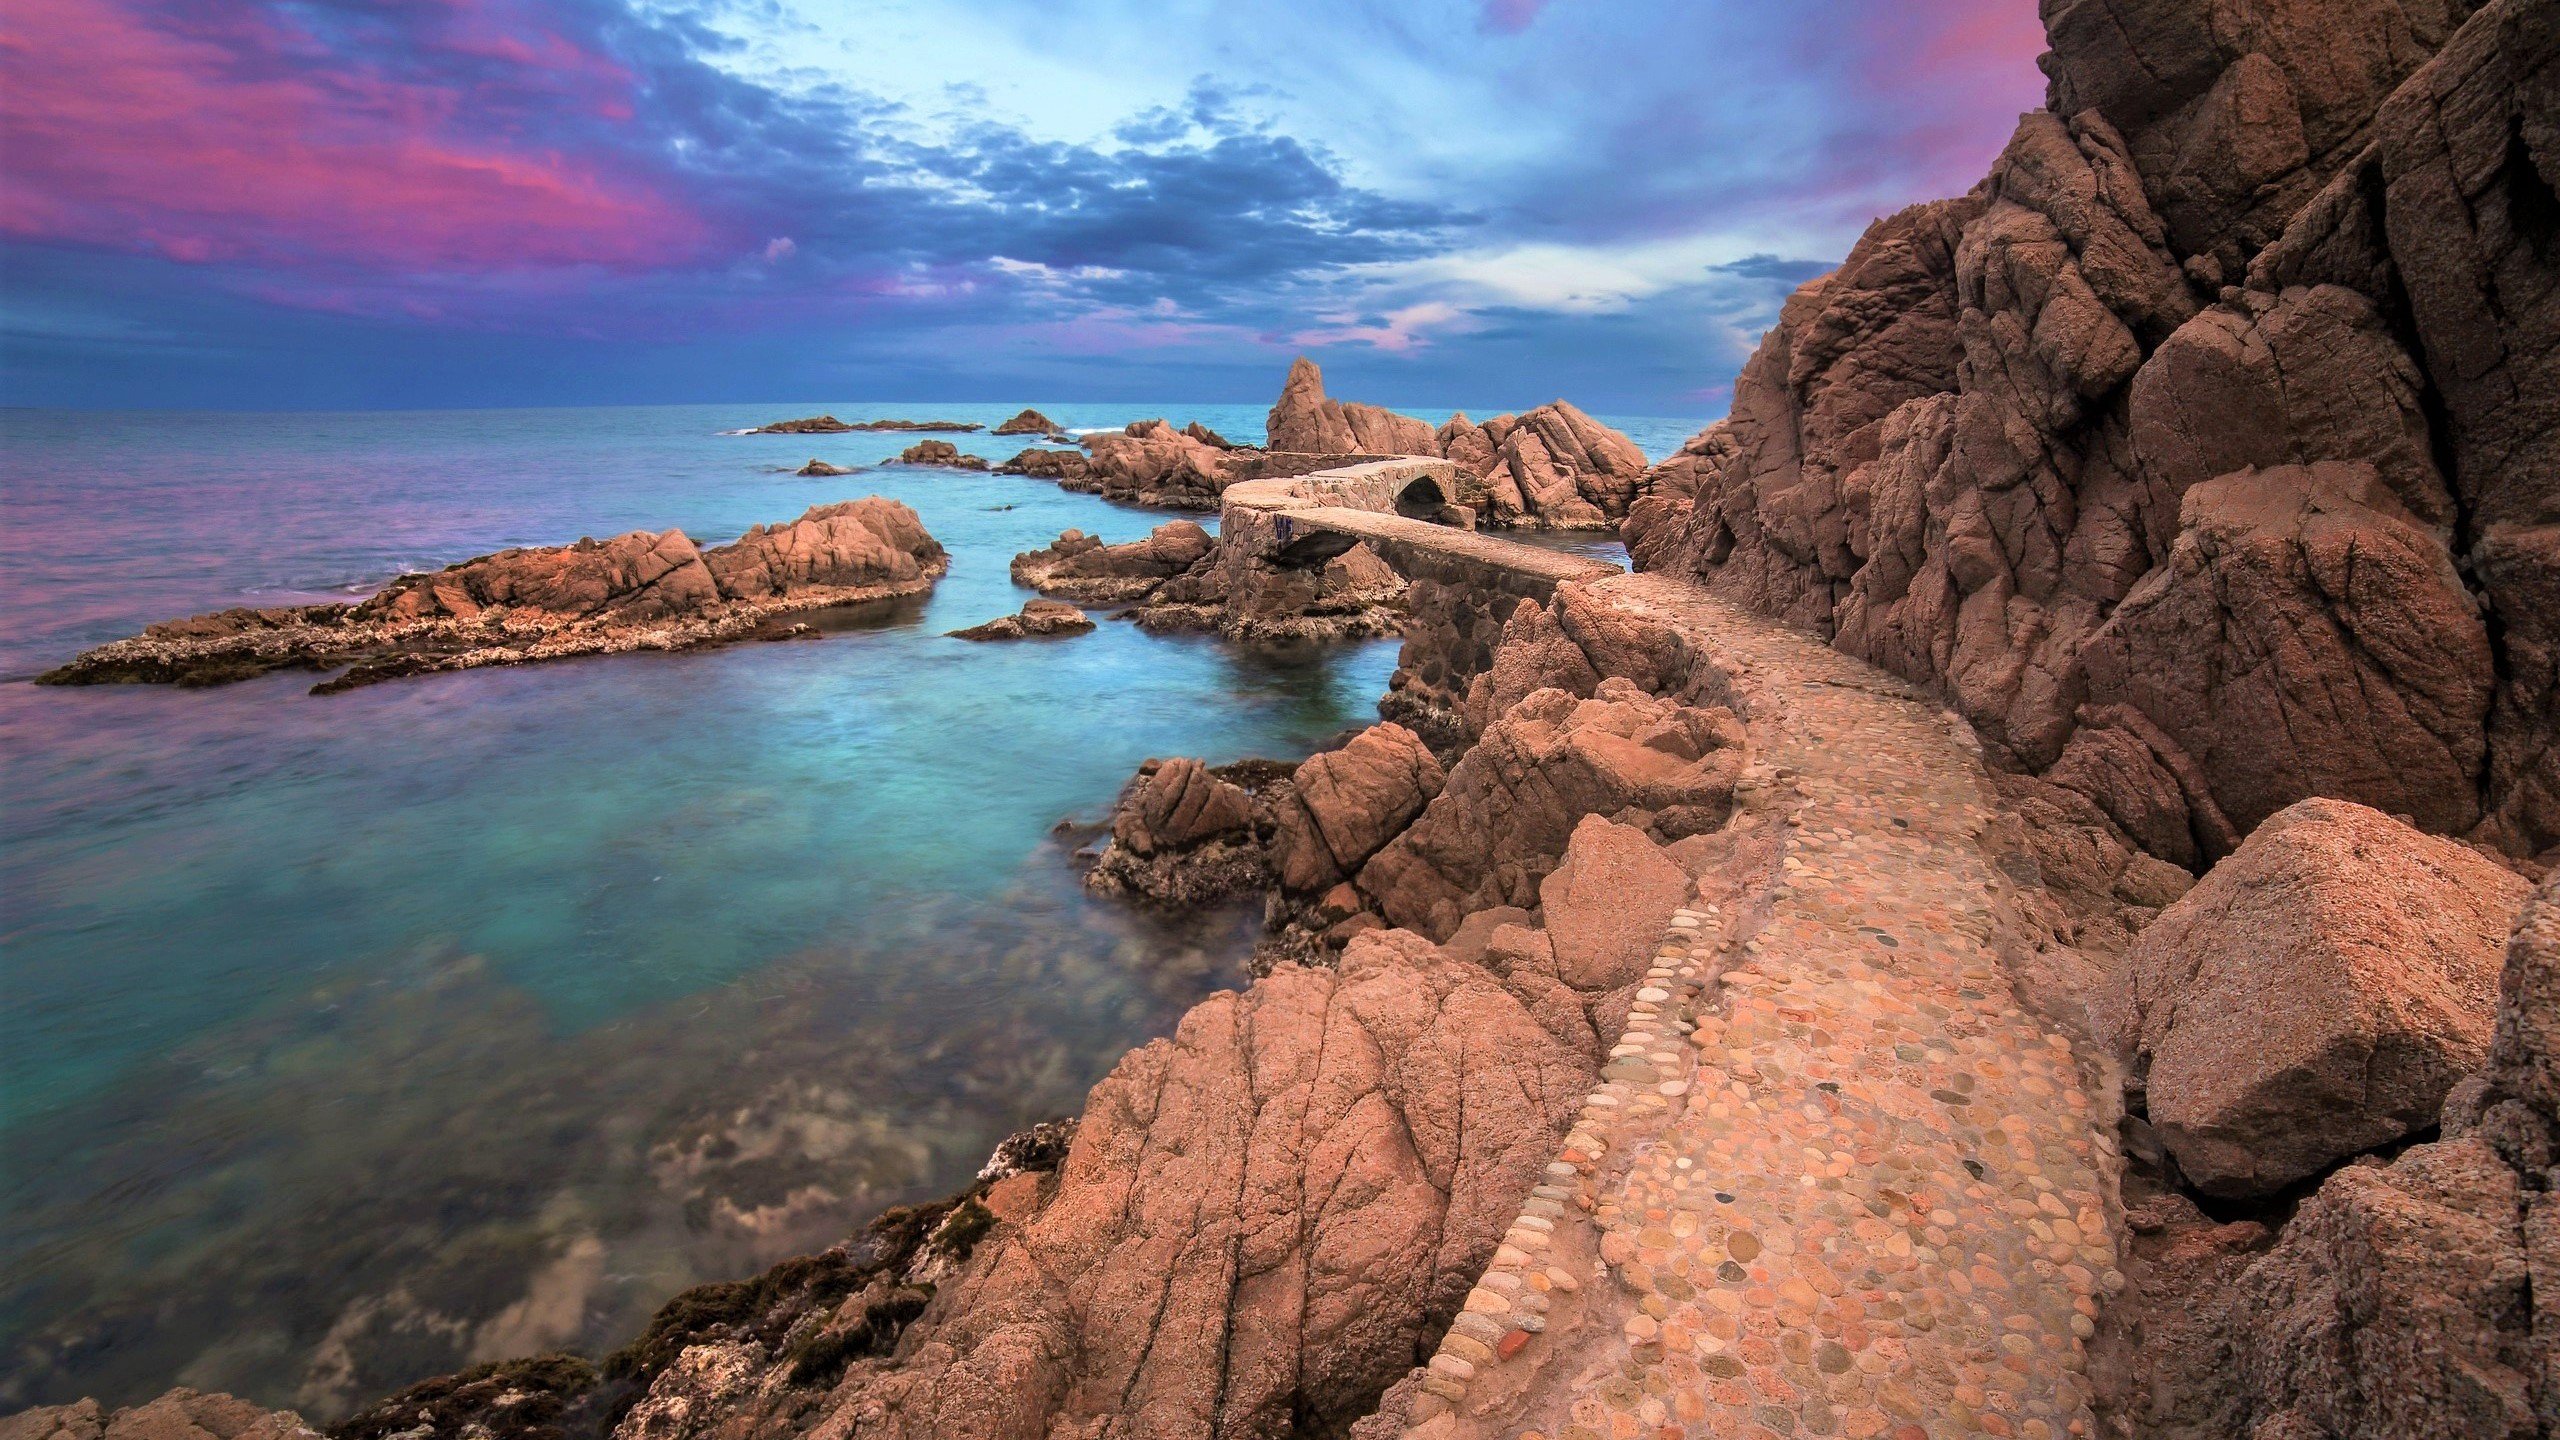 Rocks next to the ocean at sunset Wallpaper 2k Quad HD ID:10757